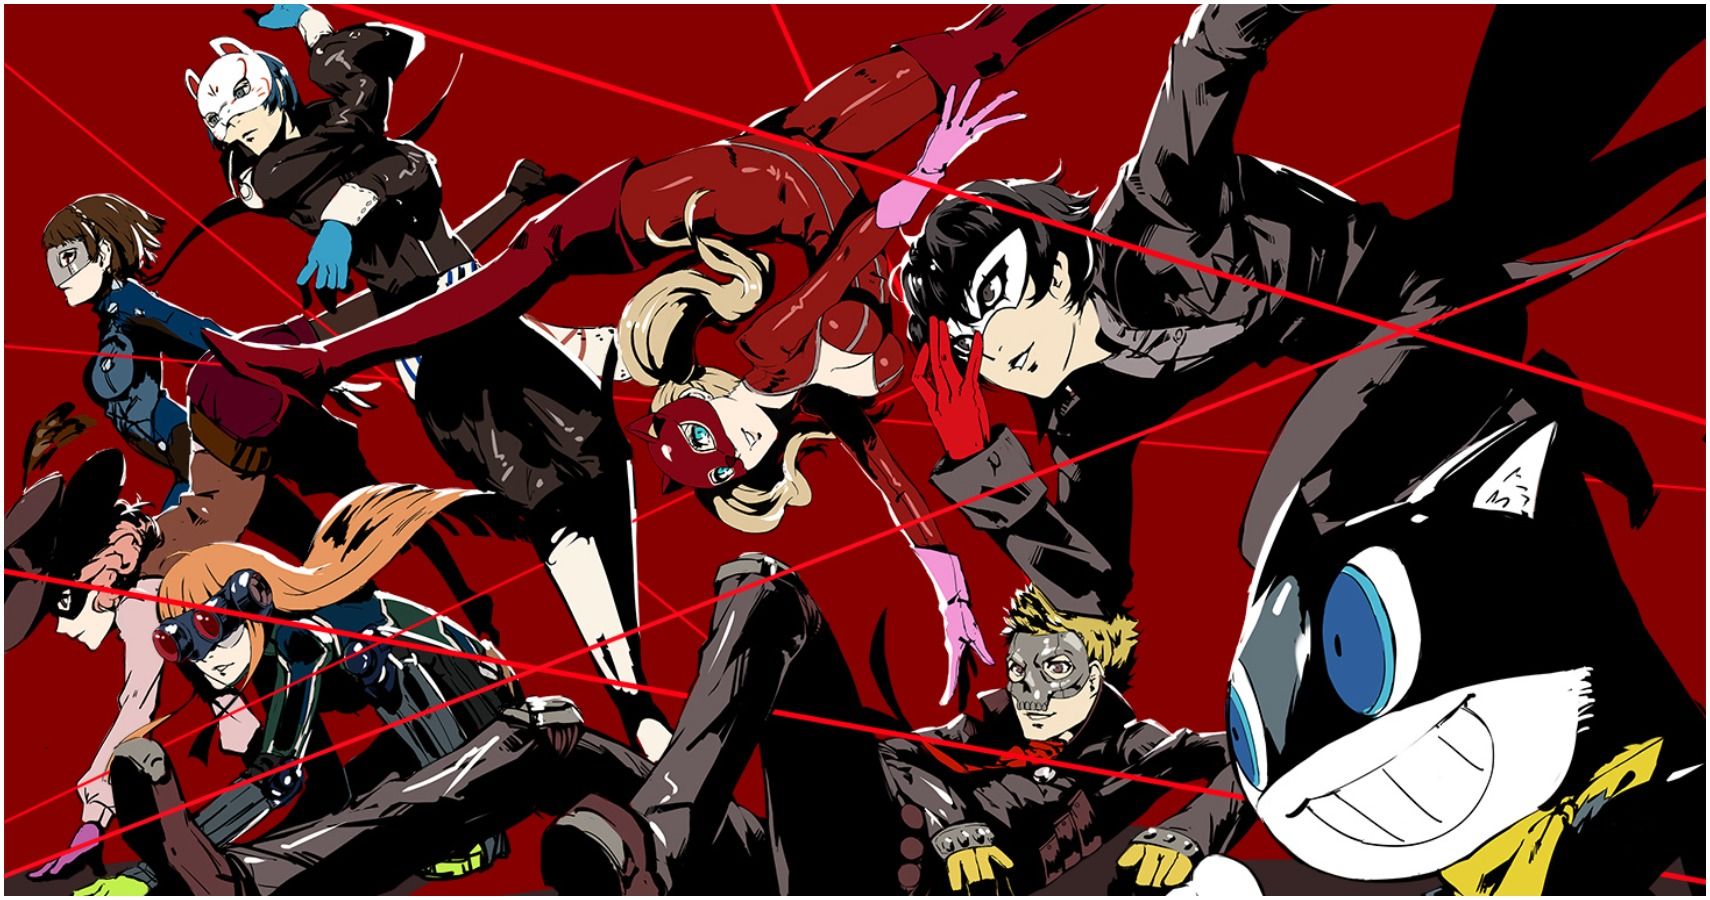 Persona 5 Is Playable On PC Through PS Now